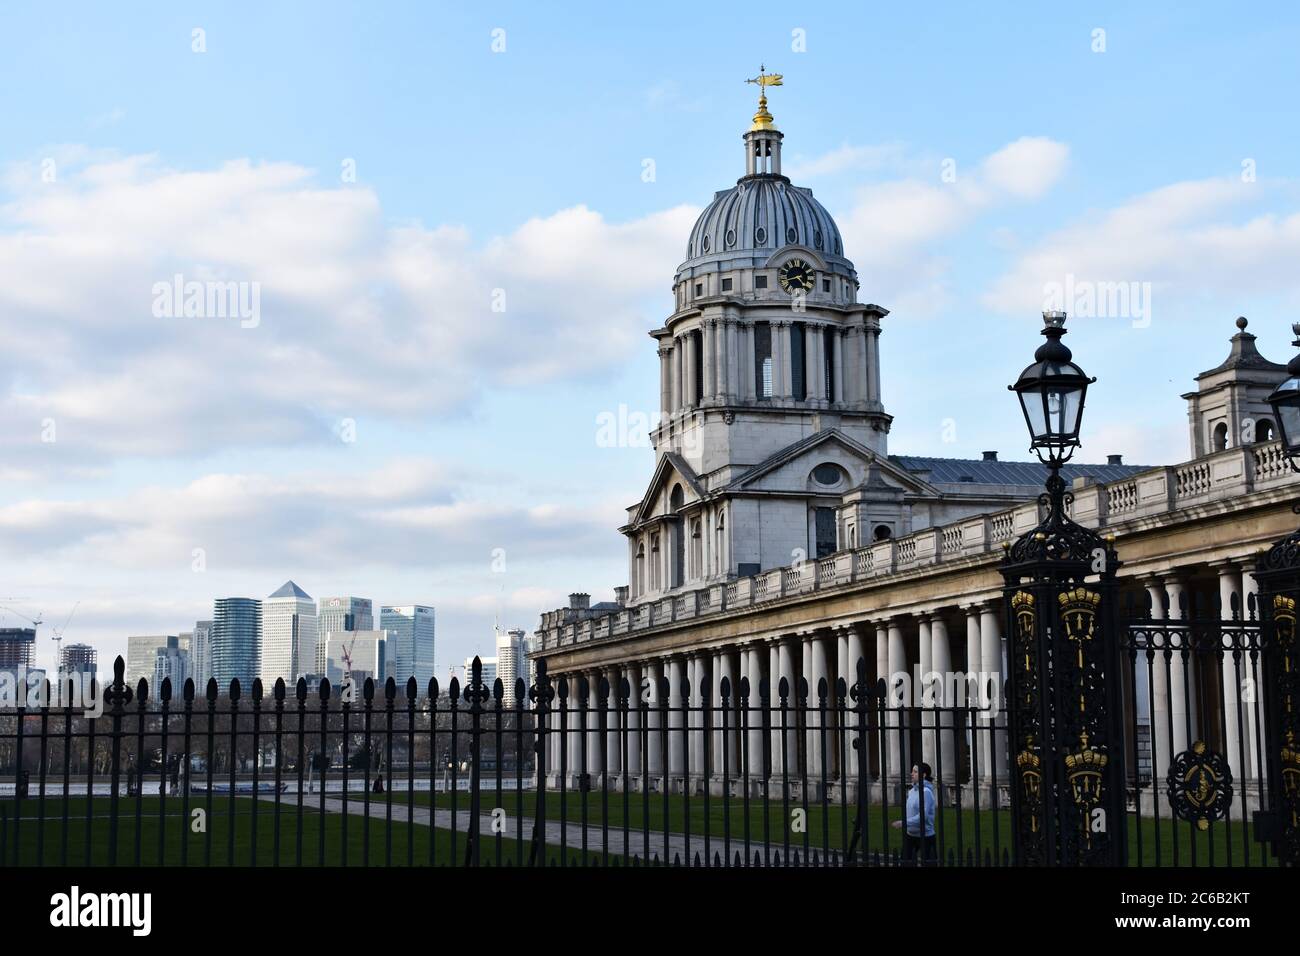 A dome from the Old Royal Naval College is seen.  In the foreground are ornate black railings and old fashioned street lamp.  Canary Wharf is behind. Stock Photo